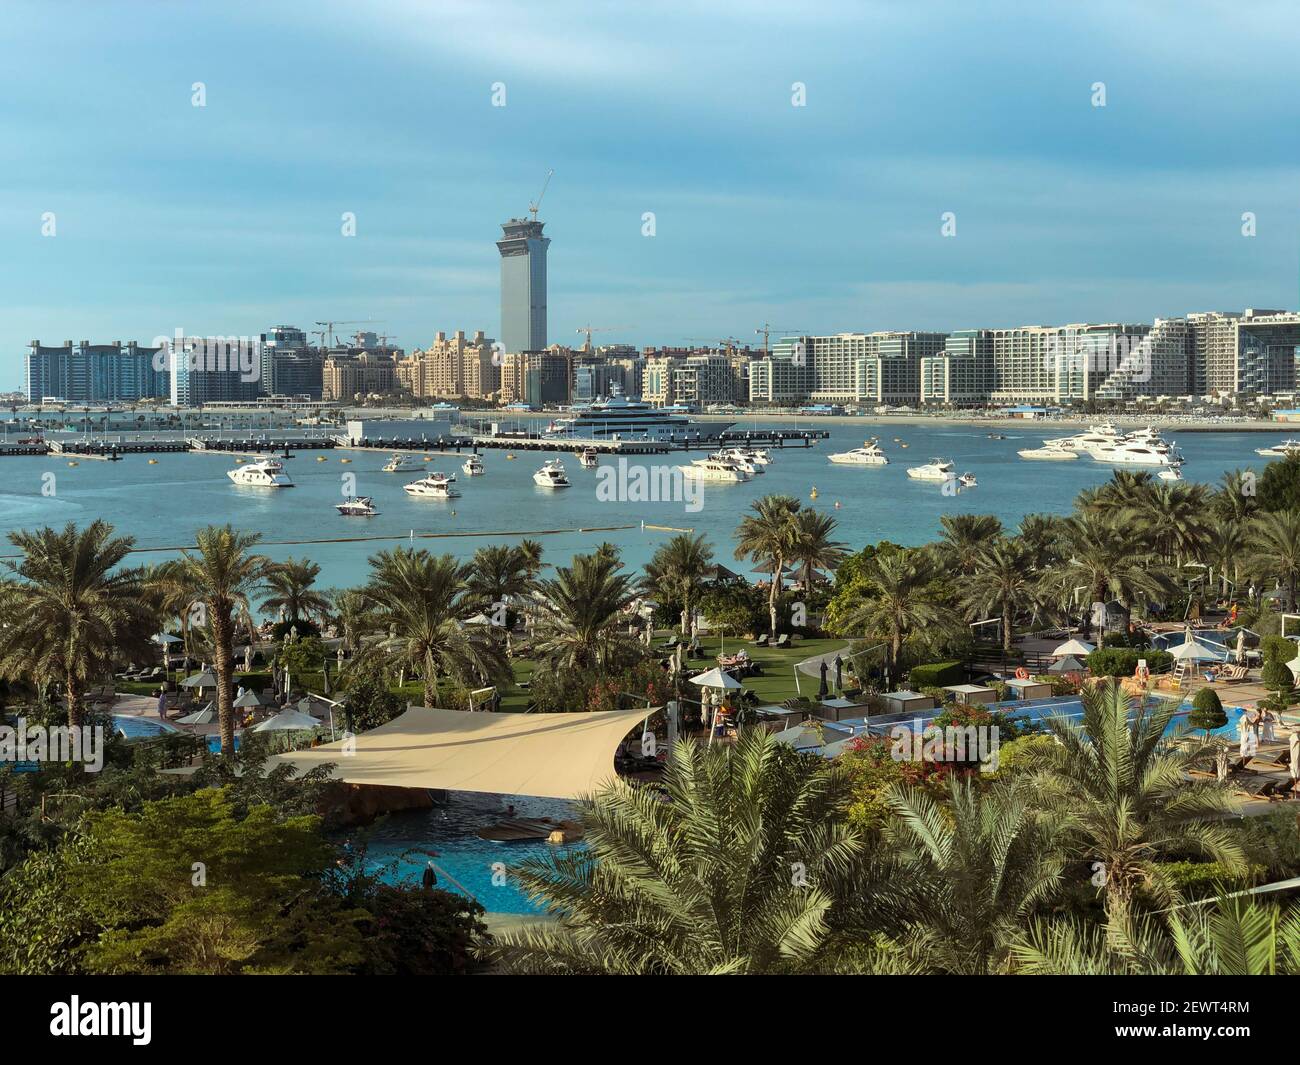 Daytime view of the poolside garden, the marina and the beautiful buildings on the palm island in Dubai, UAE. Stock Photo